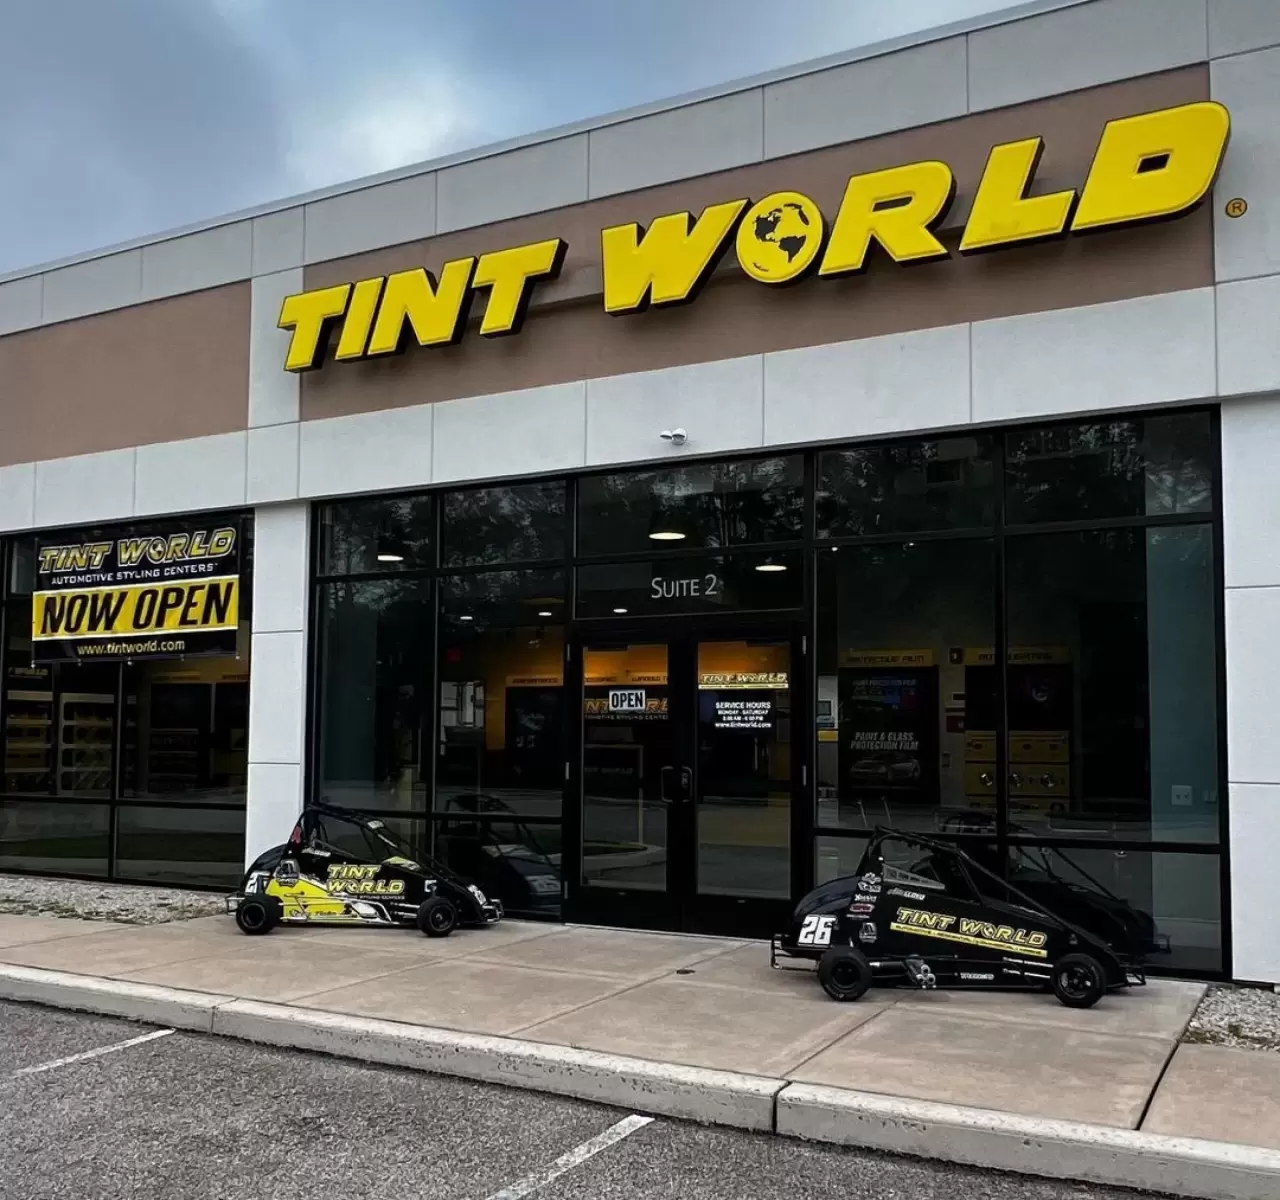 Tint World® Opens New Springfield Store